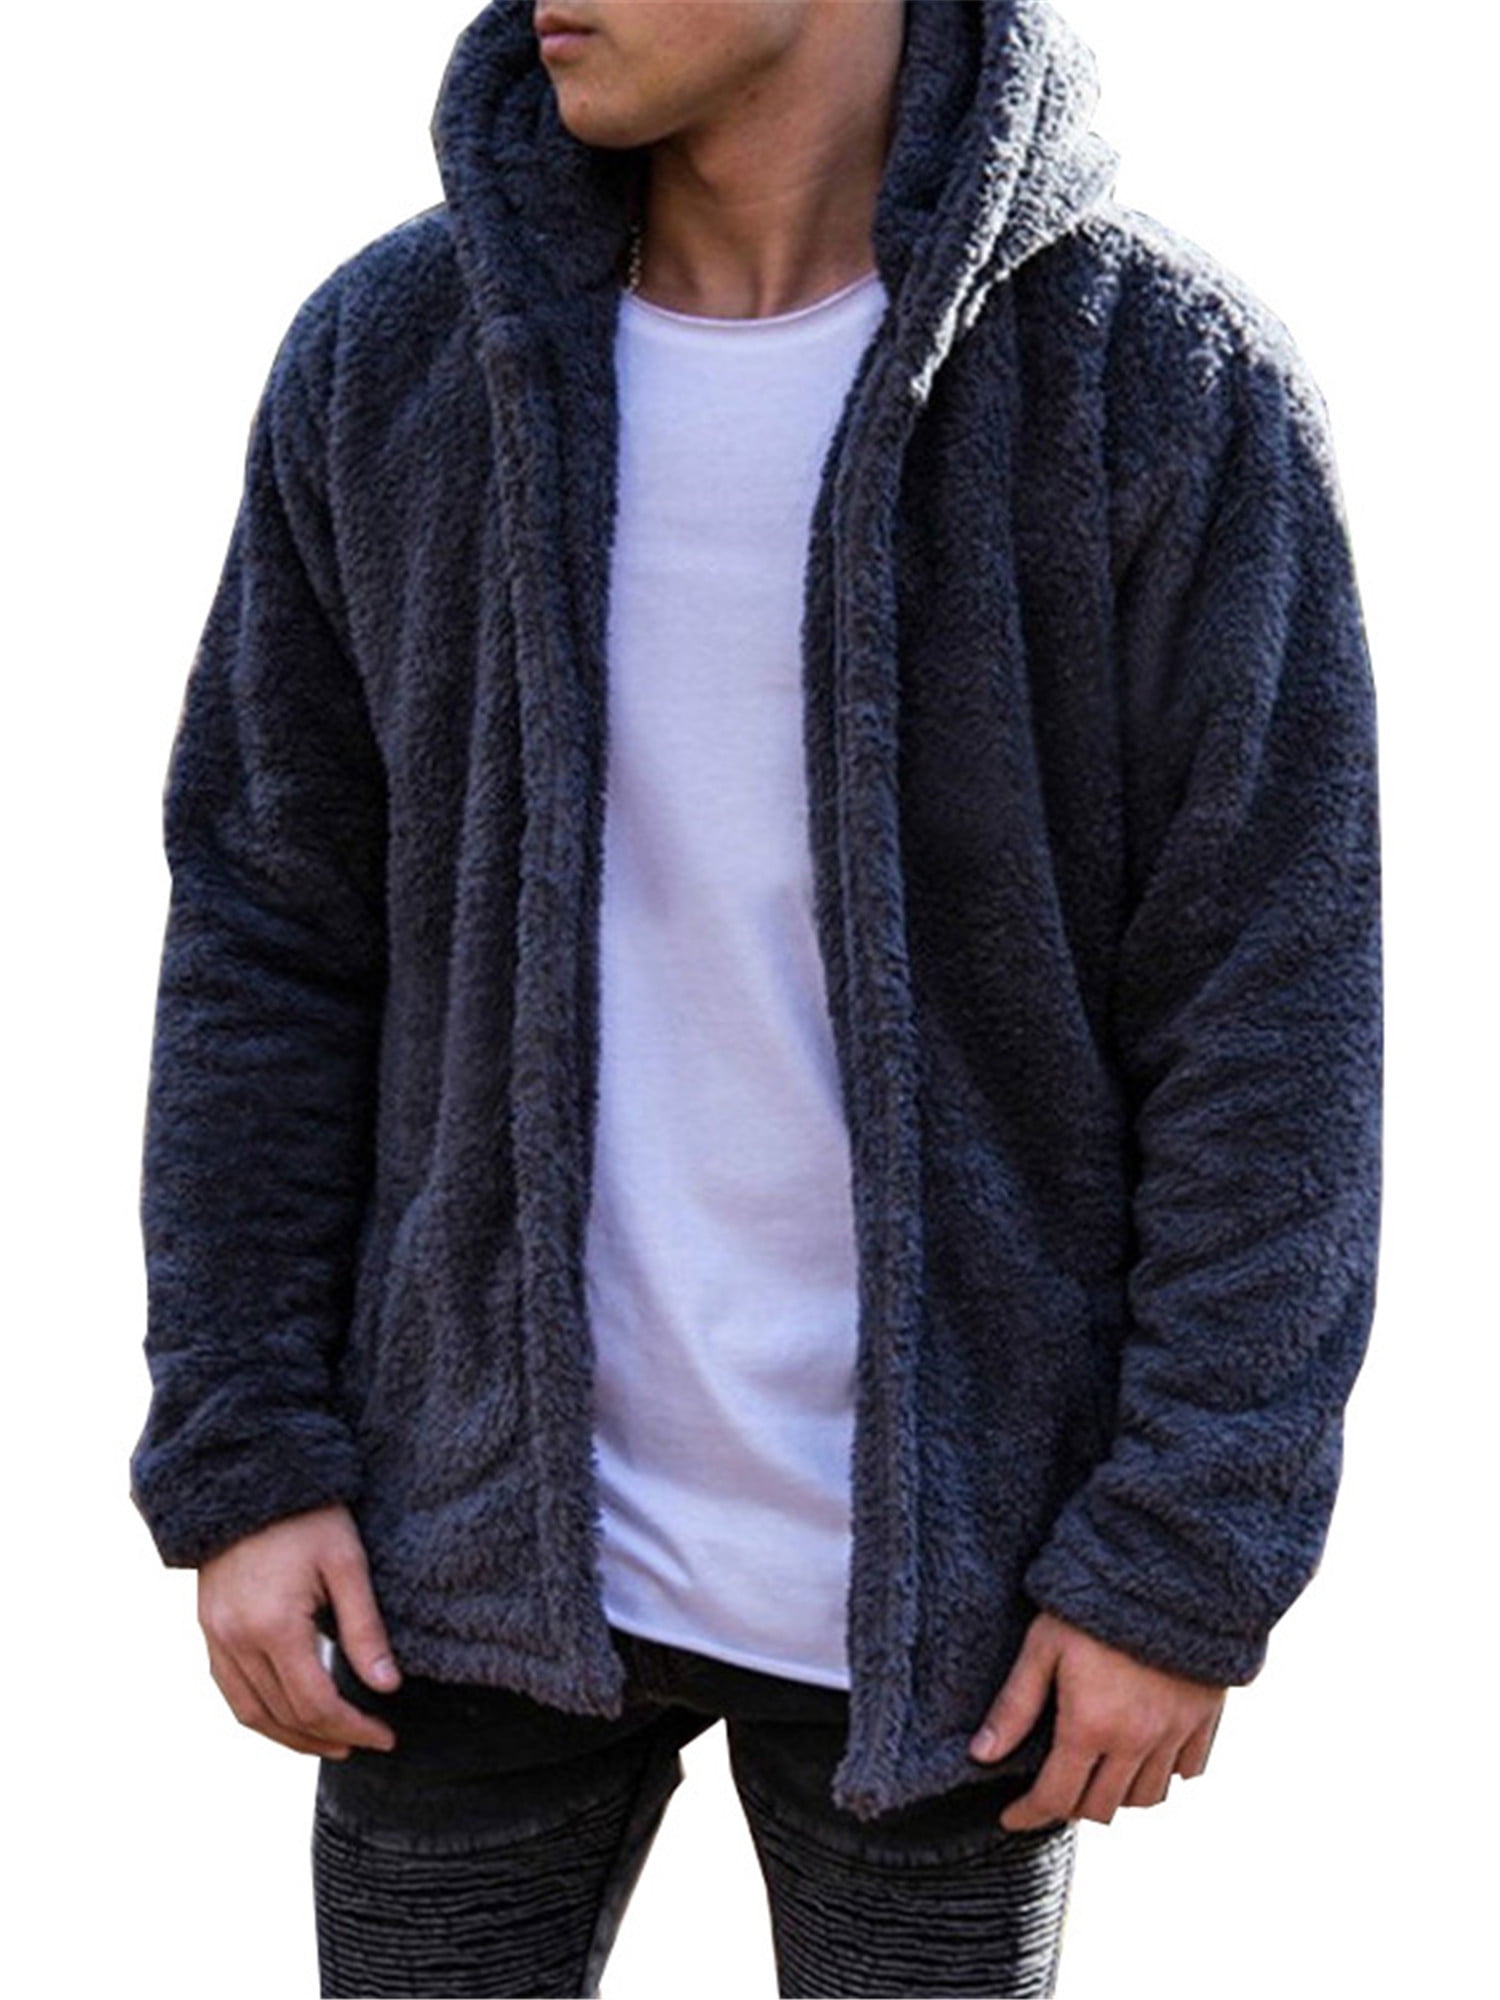 MK988 Mens Hooded Solid Fluffy Plus Size Thermal Open Front Pea Coat Trench Jacket Outerwear